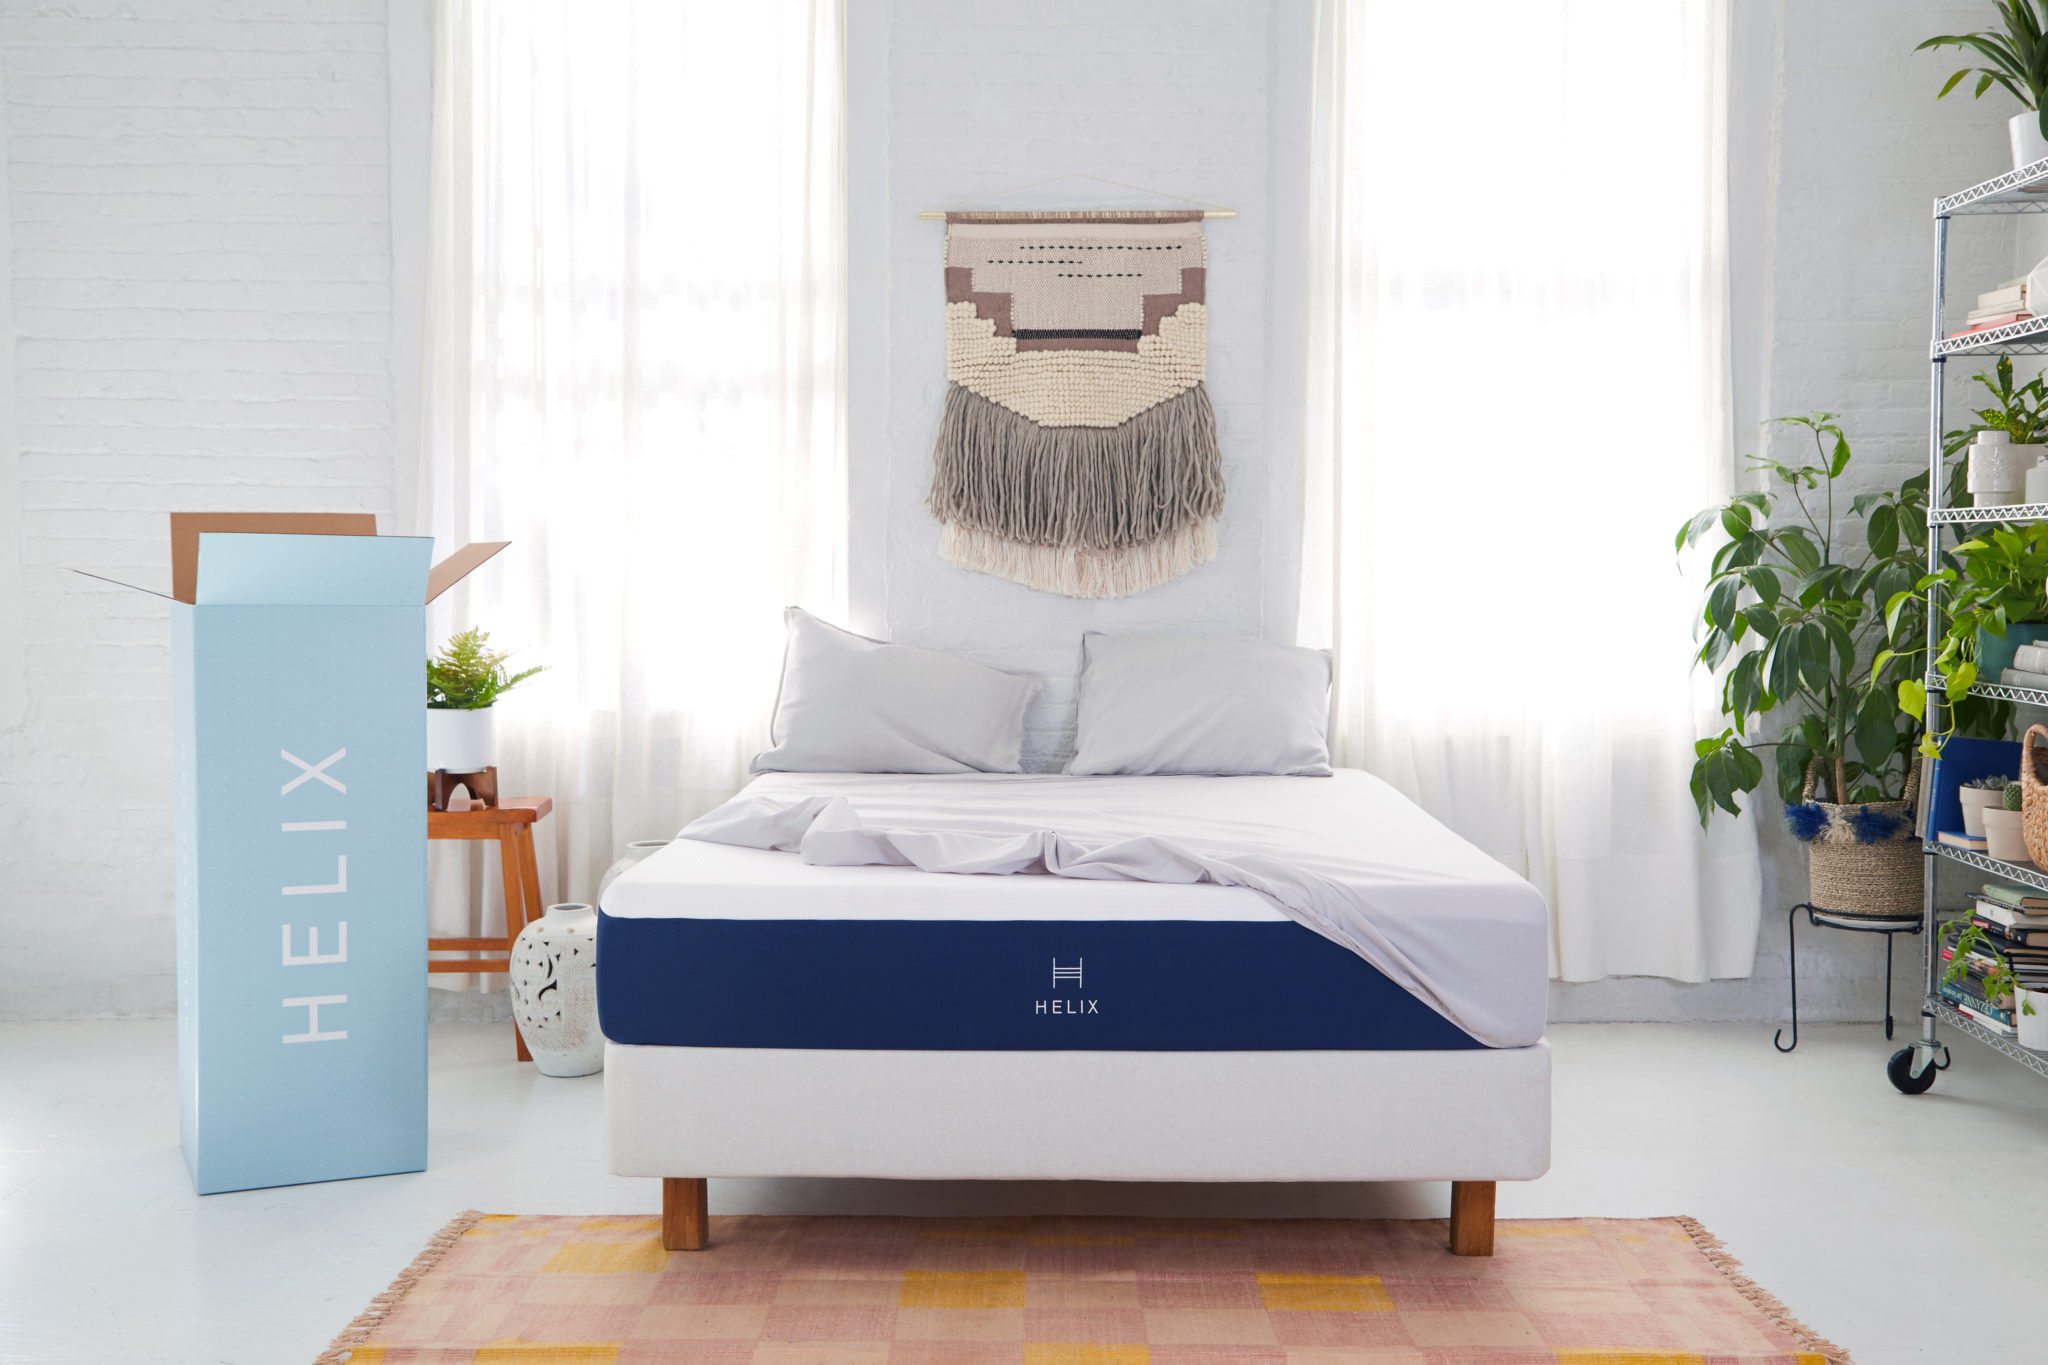 The Helix mattress is a completely new take on the mattress in a box concep...